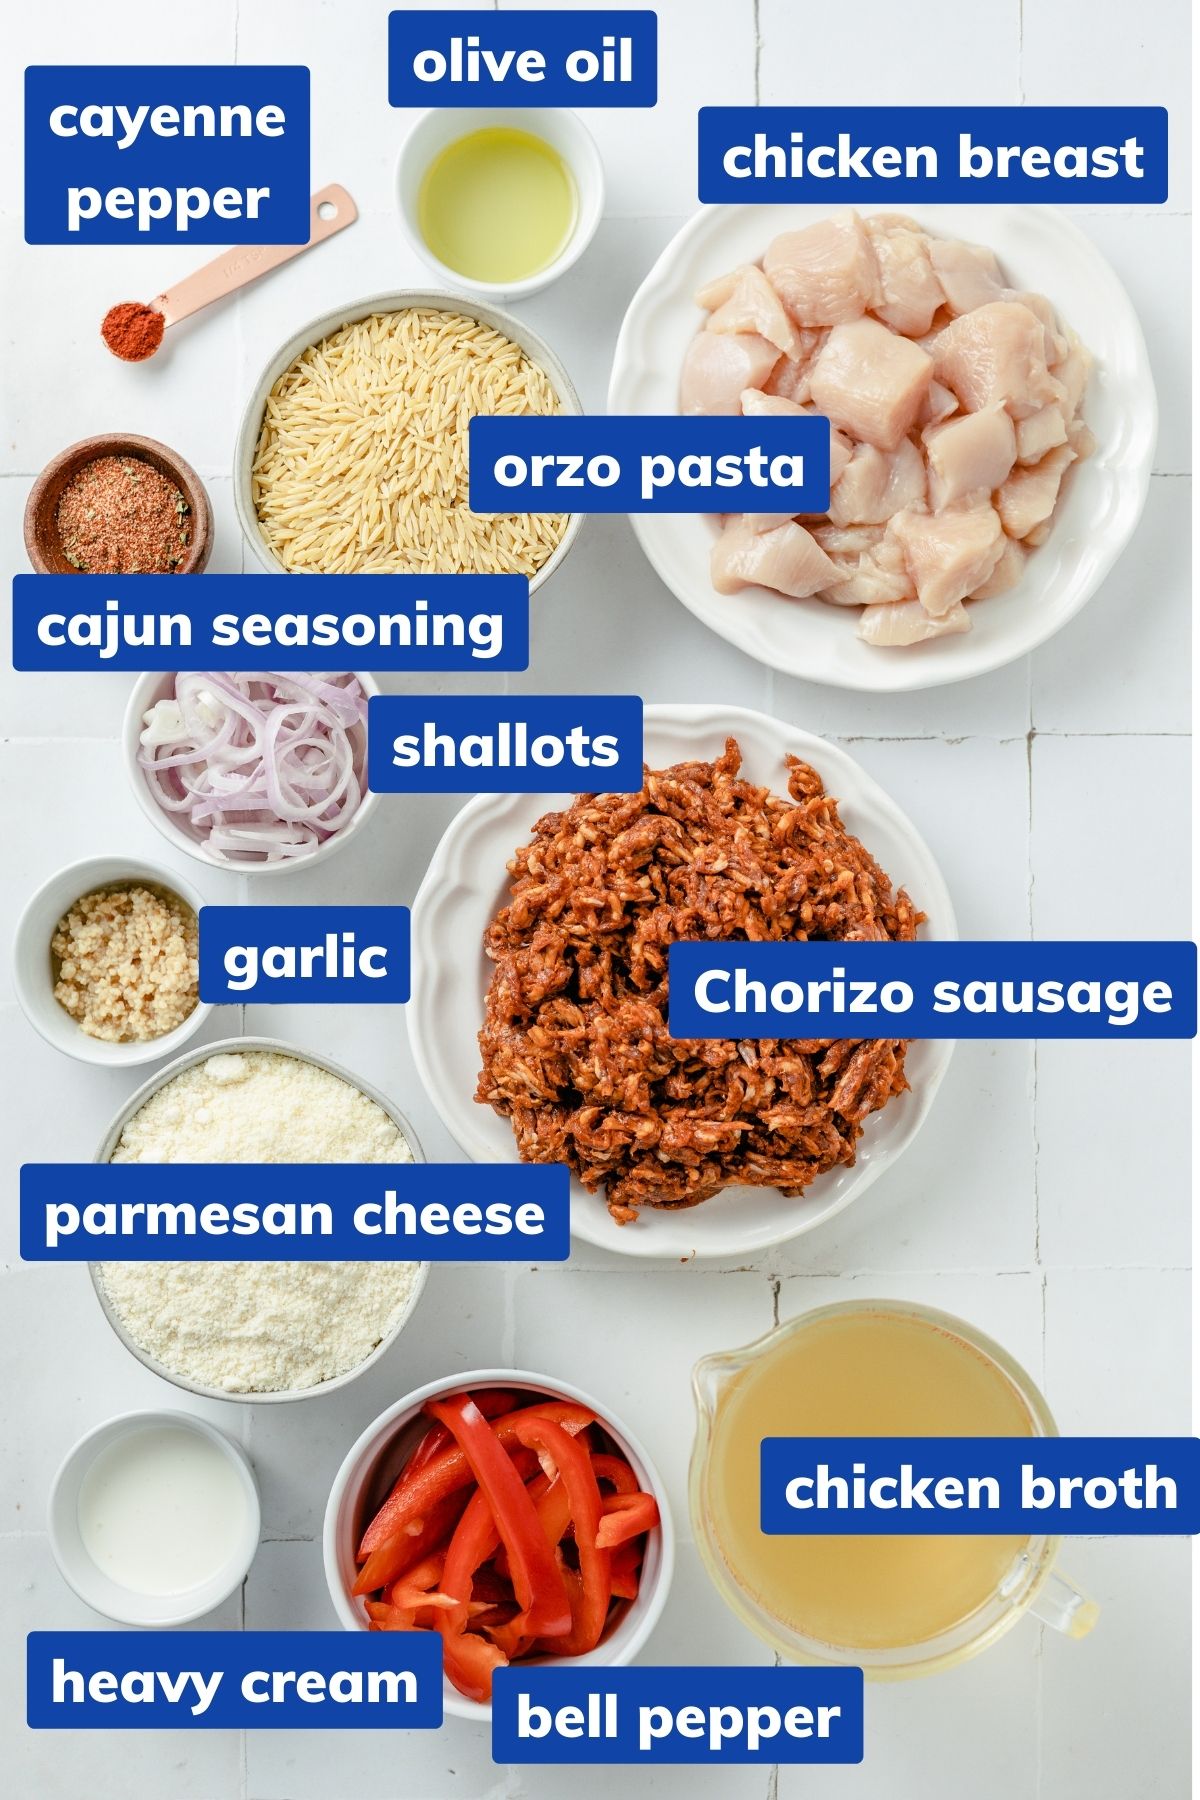 ingredients needed cajun chicken orzo: chicken breast, Cajun seasoning, olive oil, Chorizo sausage, garlic cloves, shallots, red bell pepper, chicken broth, heavy cream, parmesan cheese, cayenne pepper, and dry orzo pasta in separate bowls